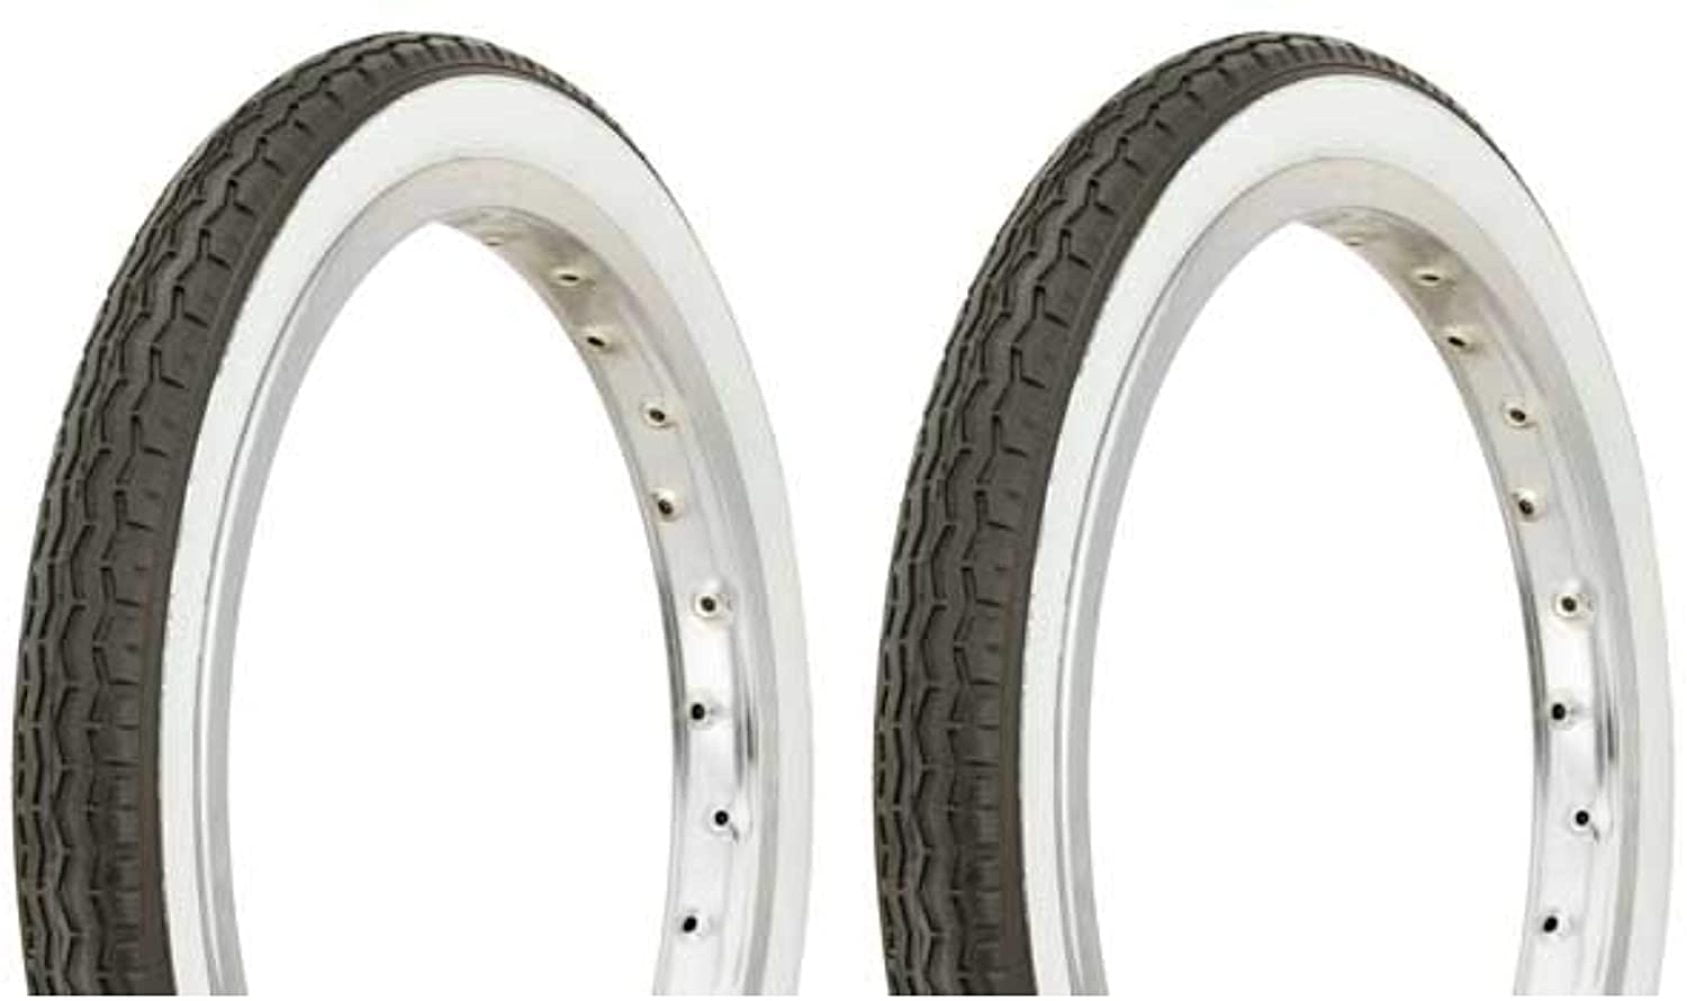 2 Duro 20" x 1.75" White Side Wall Bicycle Tires/Tubes/Rimstrip Cruiser Lowrider 